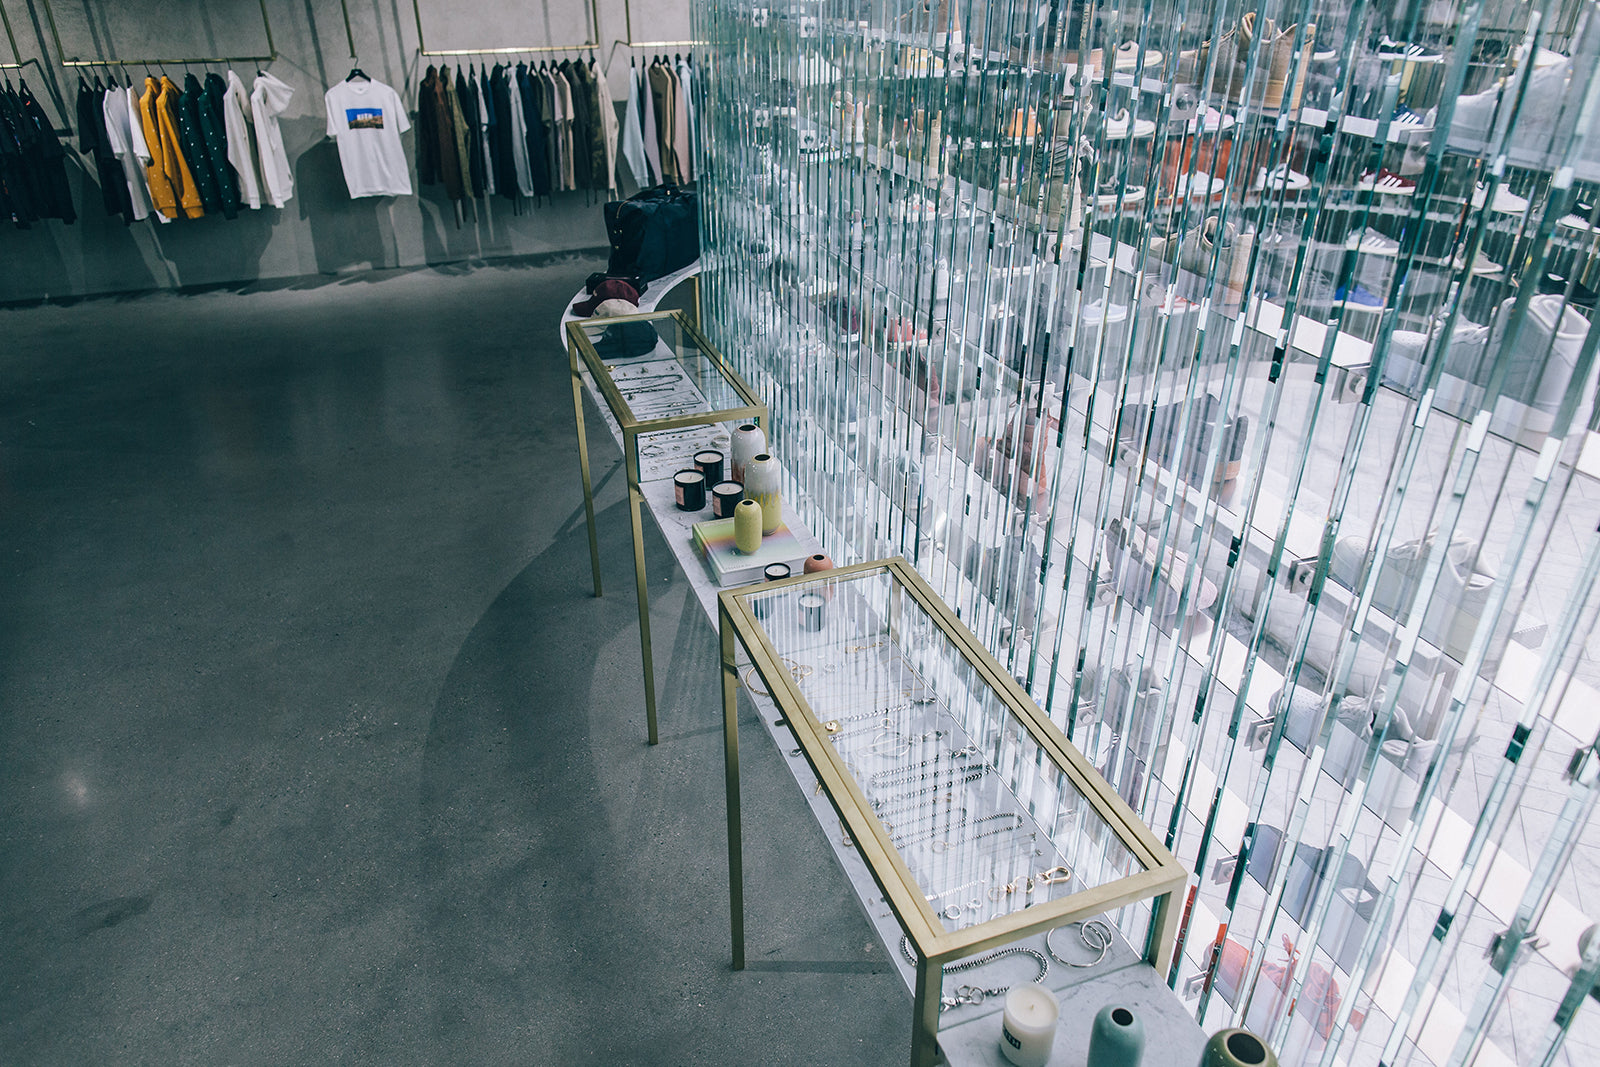 A Look Inside Our New Flagship Store in Los Angeles – Kith